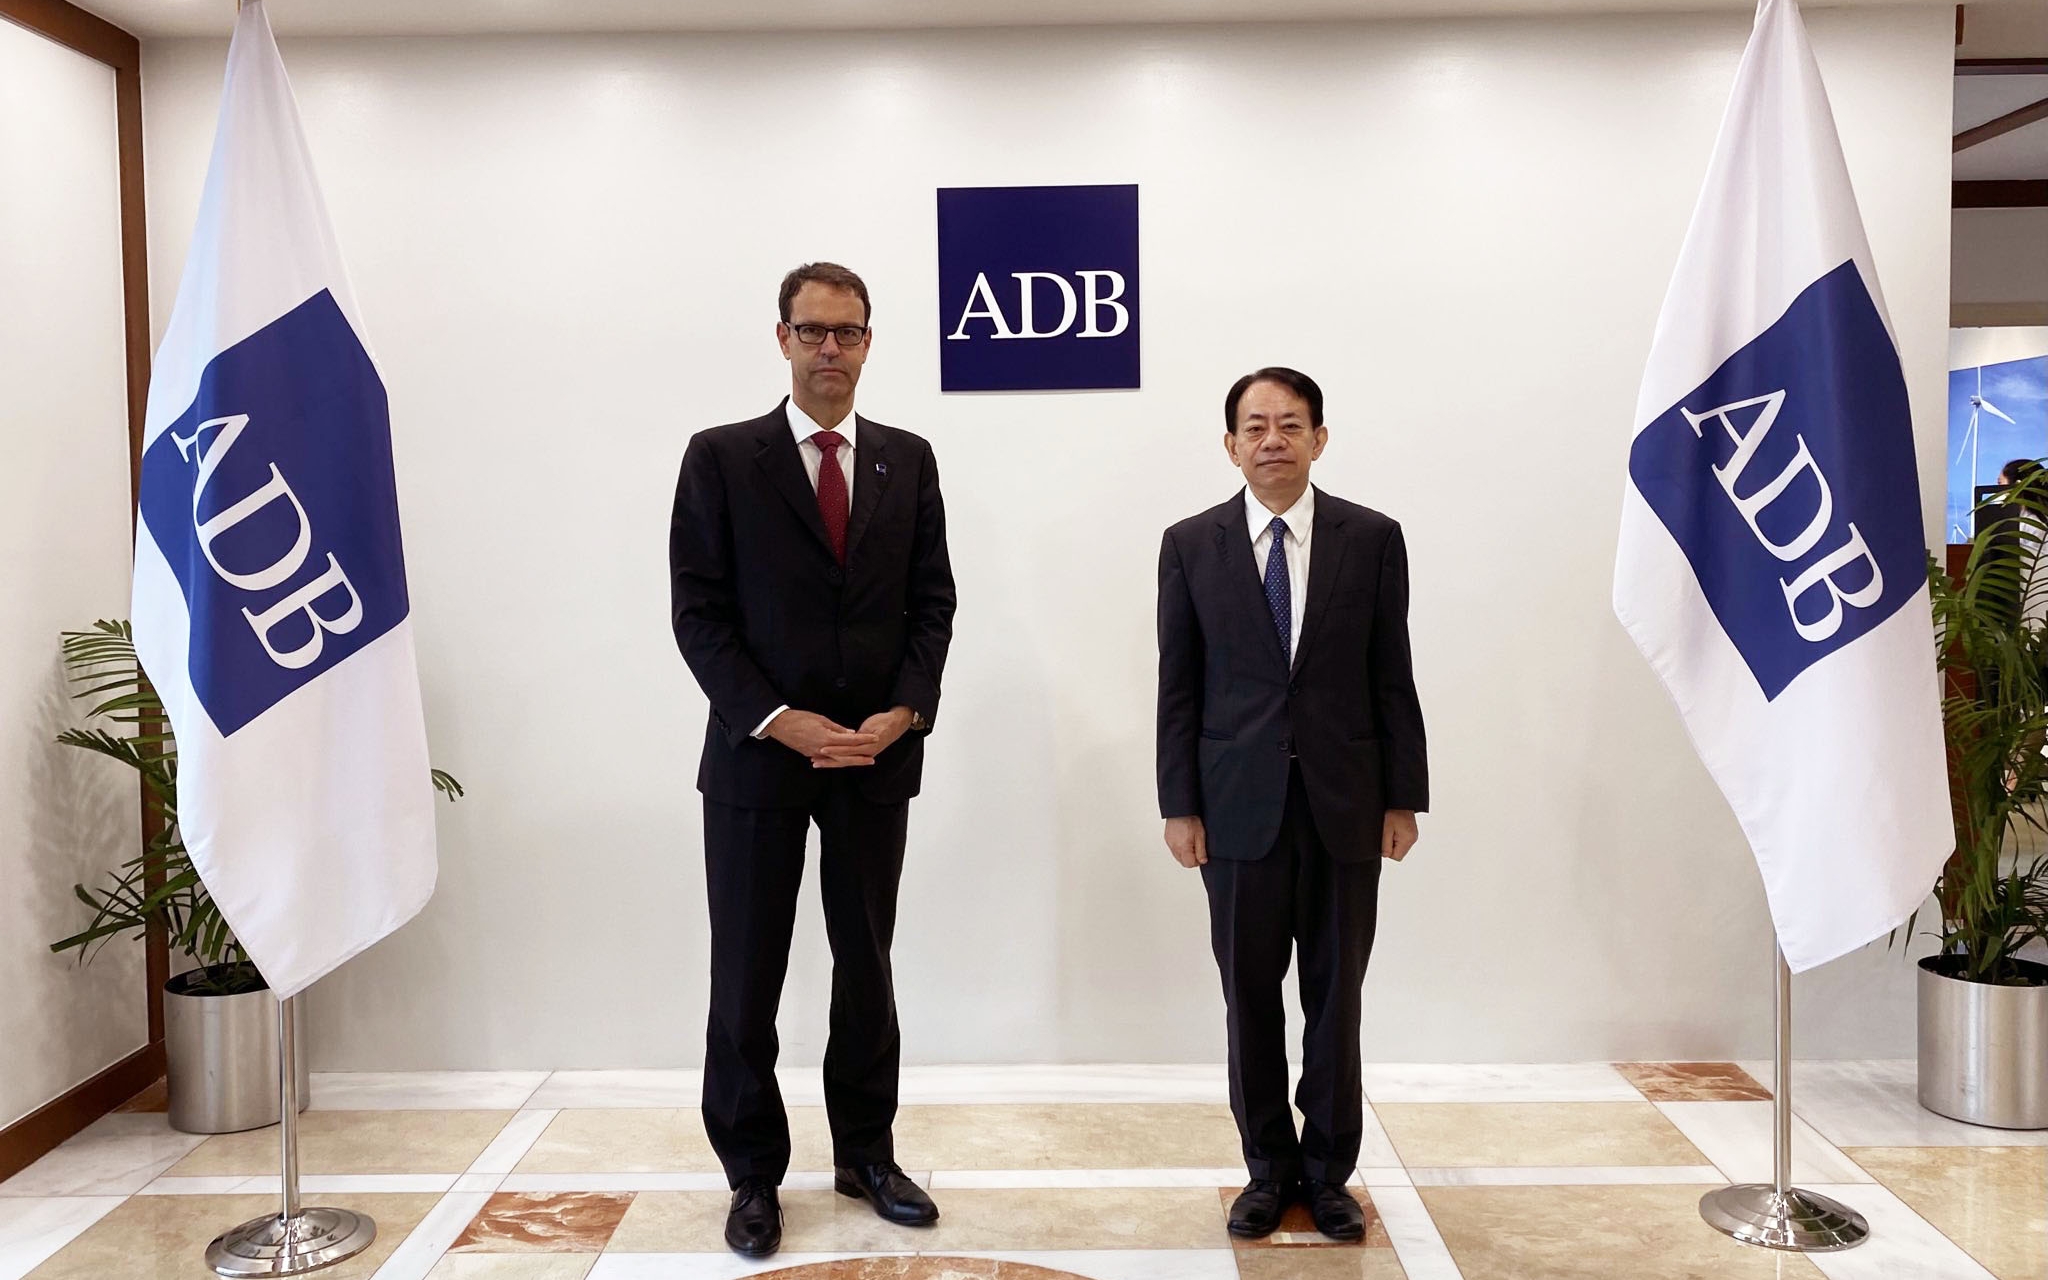 Ambassador Dominique Paravicini (SECO), Swiss Governor to the Asian Development Bank (AsDB), met with AsDB President Masatsugu Asakawa during the Asian Development Bank (AsDB) Annual Meeting held in Manila, Philippines in September 2022.